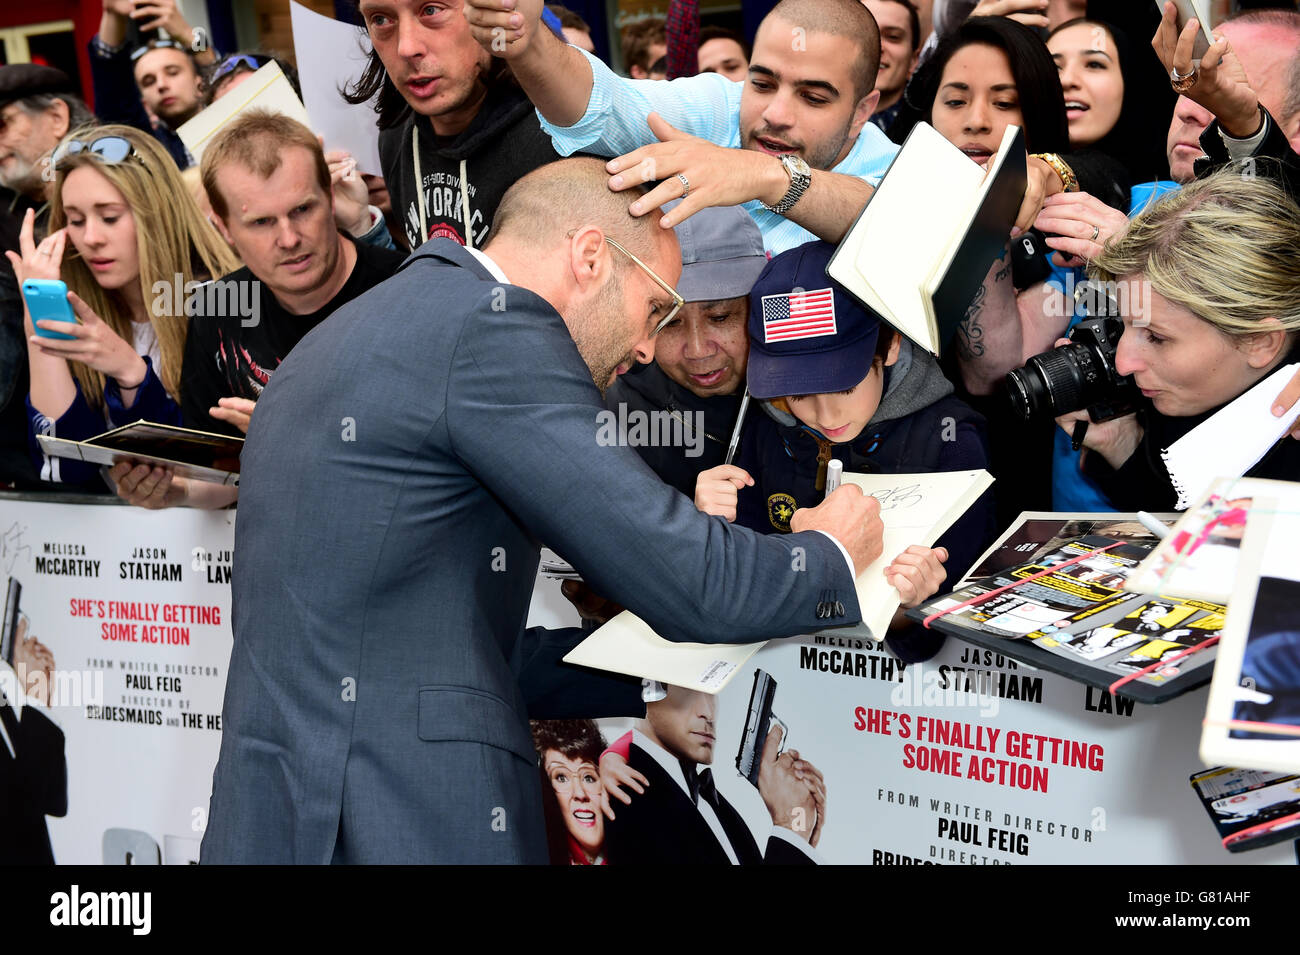 Jason Statham signs autographs for fans as he attends the European premiere  of Spy at the Odeon Leicester Square, London. PRESS ASSOCIATION Photo.  Picture date: Wednesday May 27, 2015. Photo credit should